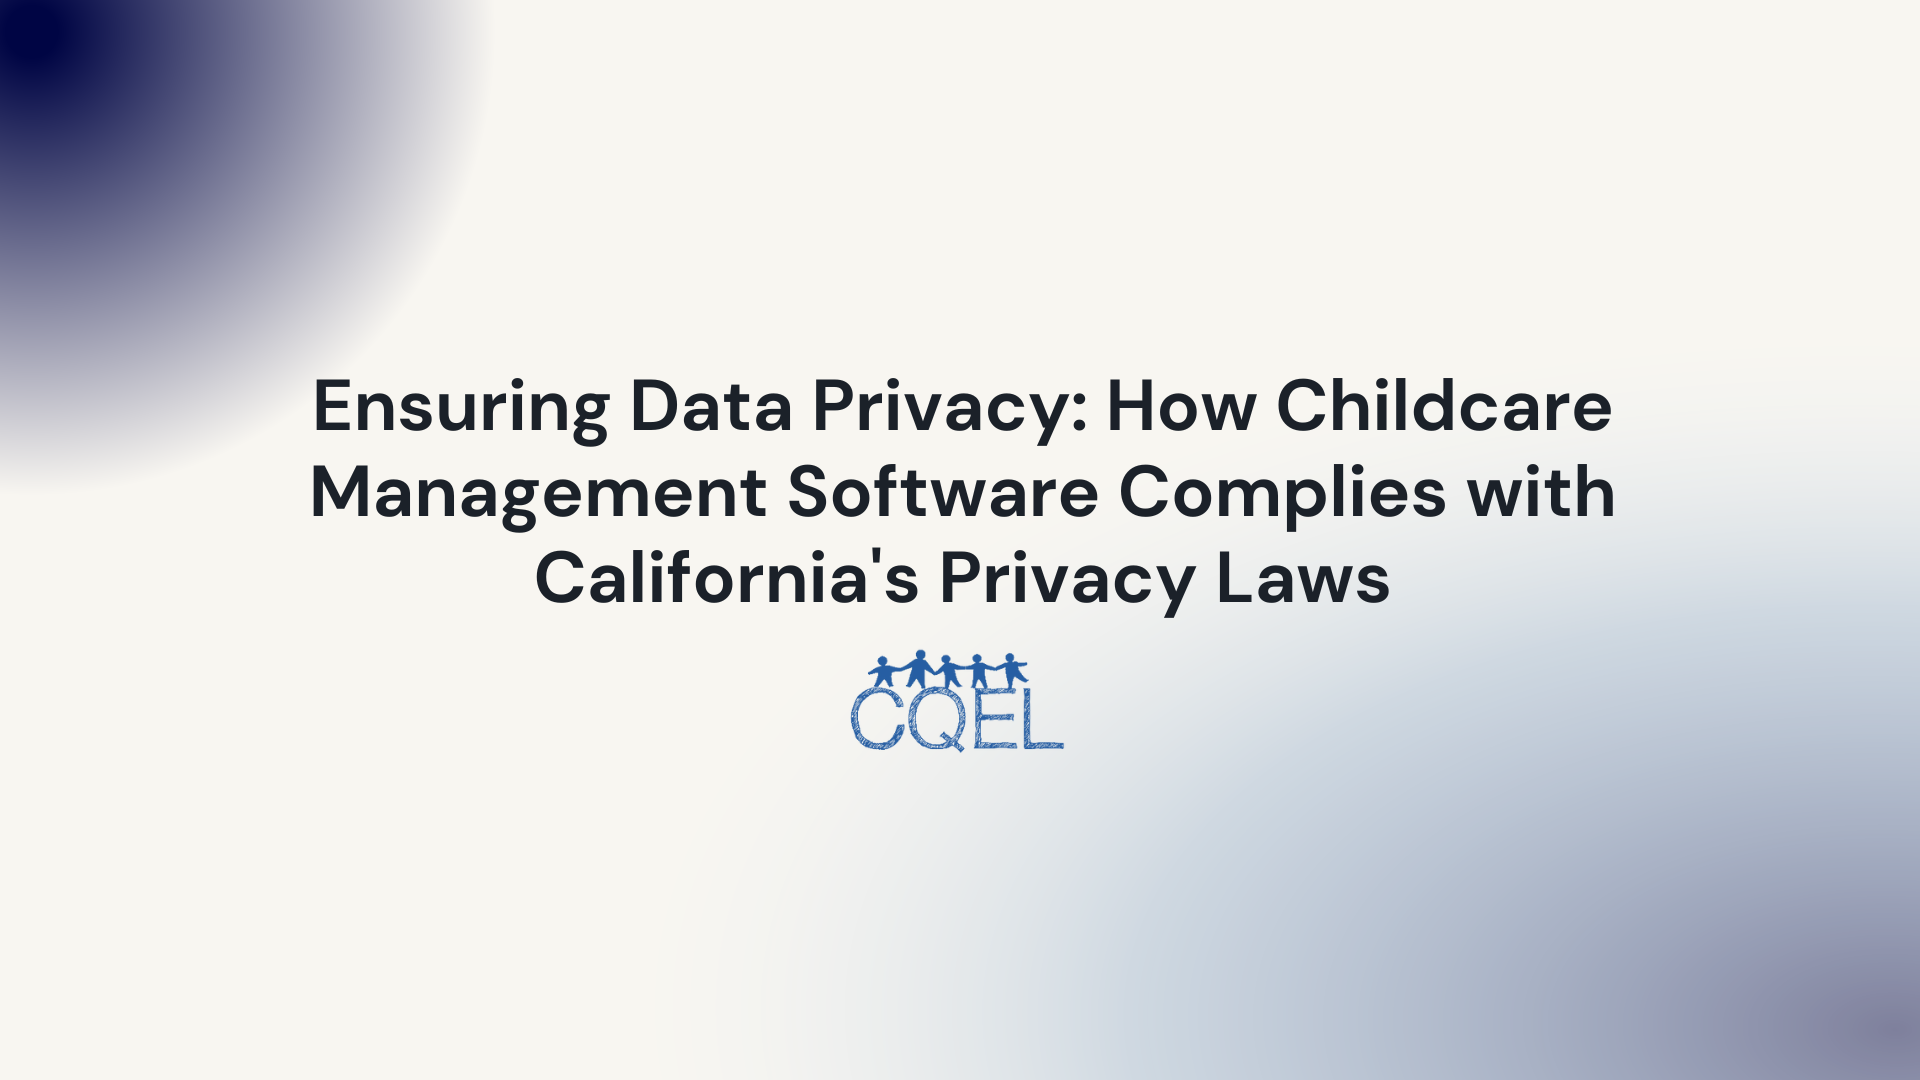 Ensuring Data Privacy: How Childcare Management Software Complies with California's Privacy Laws